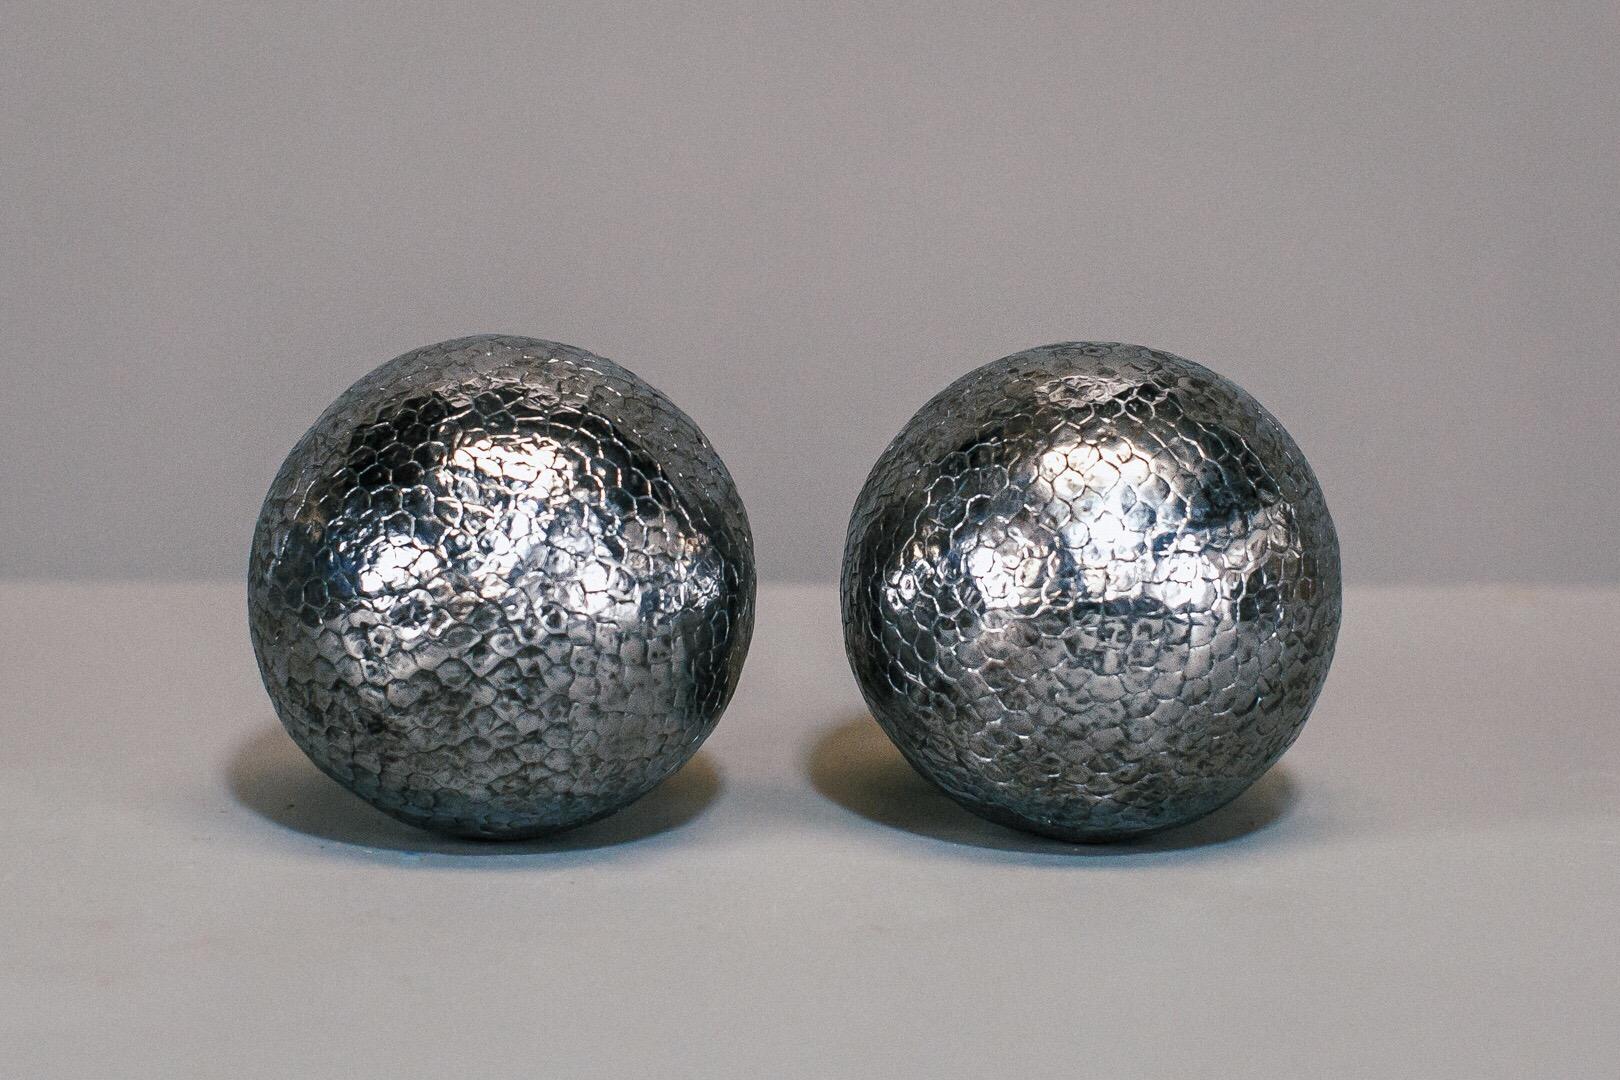 Pair of early 19th century Boules de lyonnaise or petanque boules, hammered nails into wooden ball, with decorative design using iron and brass nails to help differentiate each players boules. Highly polished.
 